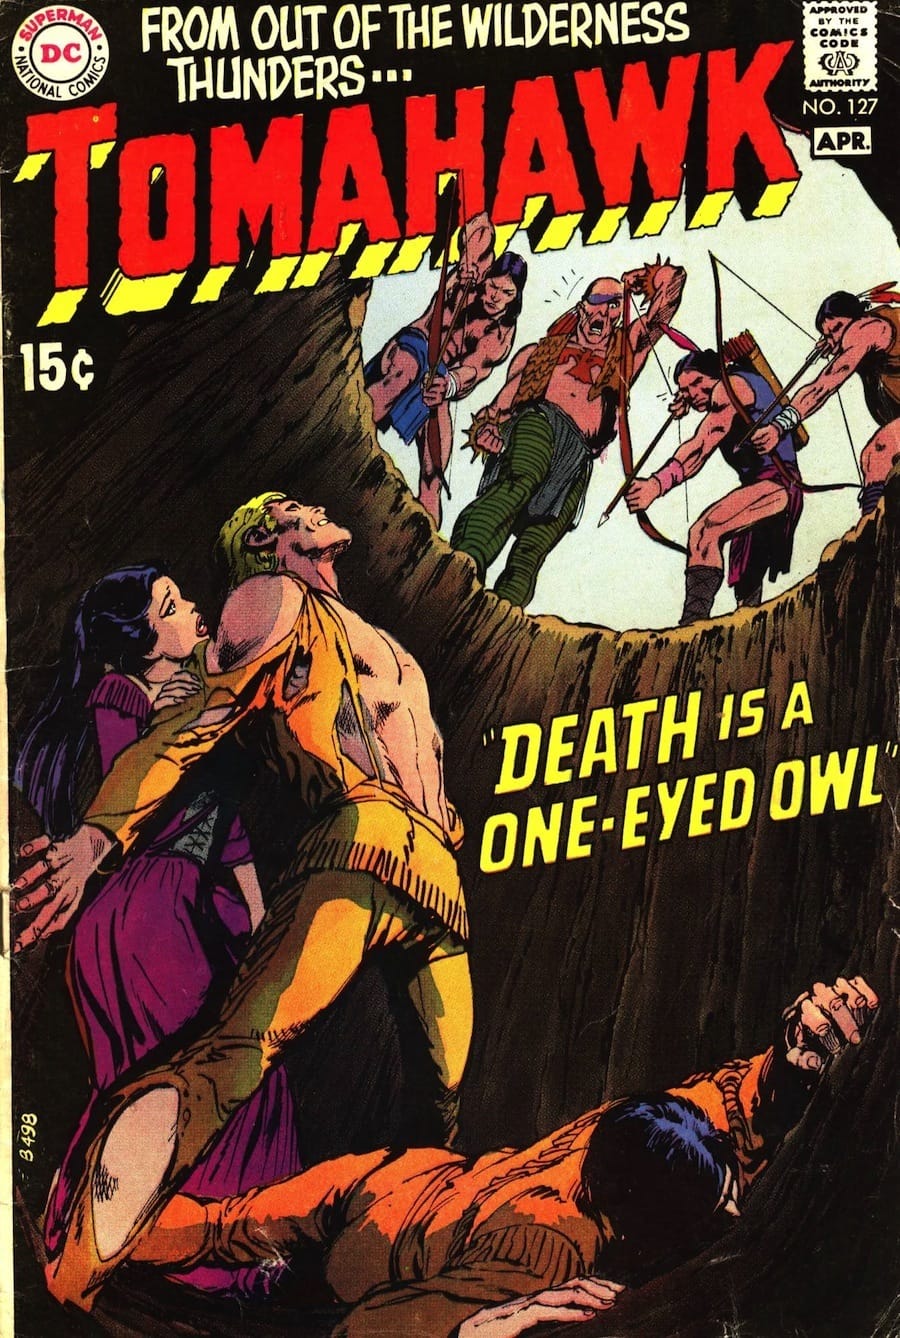 Neal Adams bronze age western dc 1970s cover - Tomahawk #127